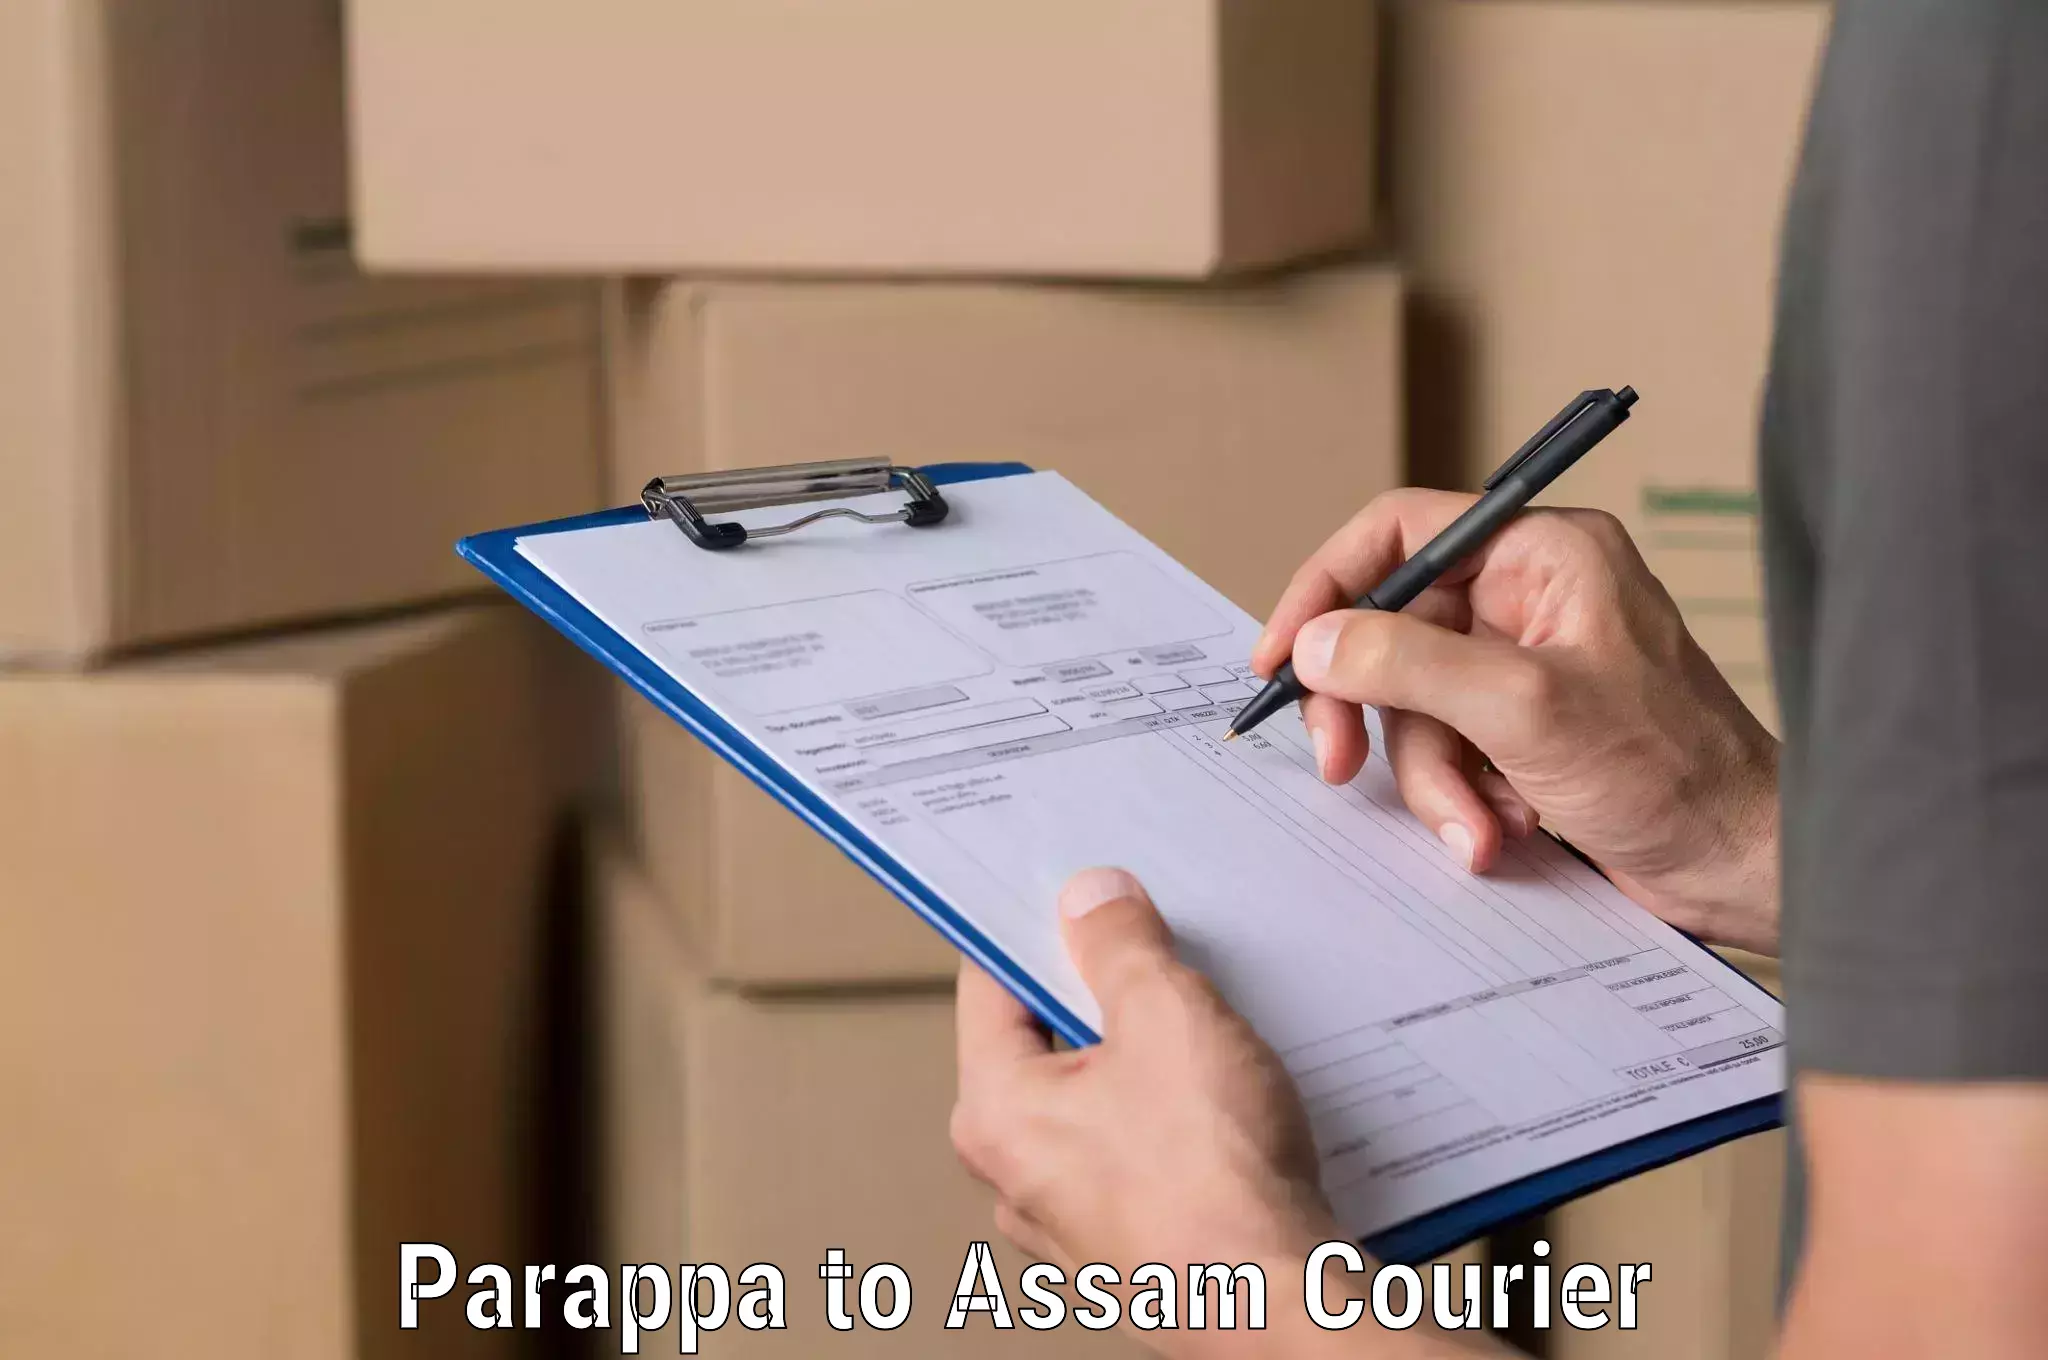 Enhanced tracking features Parappa to Assam